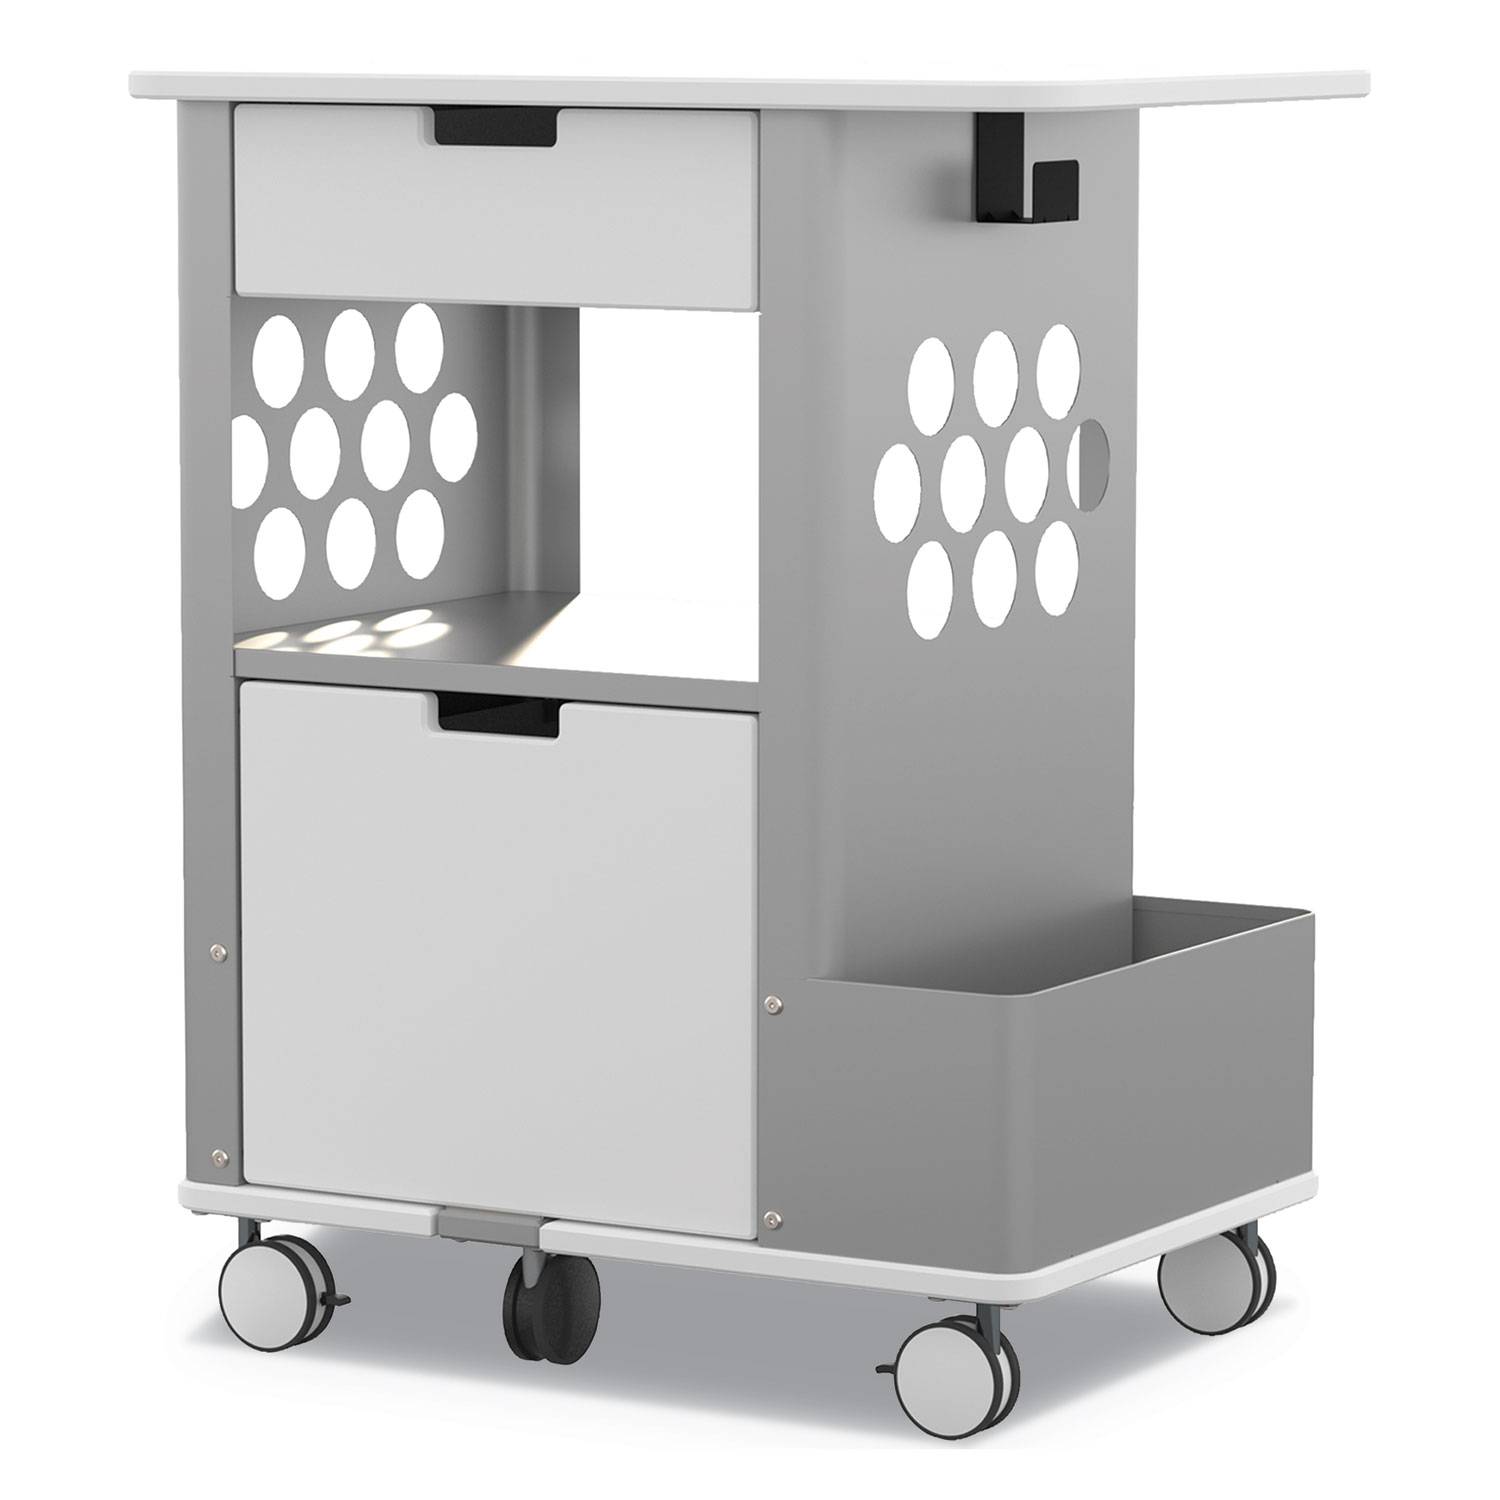  Safco 5202WH Mobile Storage Cart, 28w x 20d x 33.5h, White, 150-lb Capacity (SAF5202WH) 